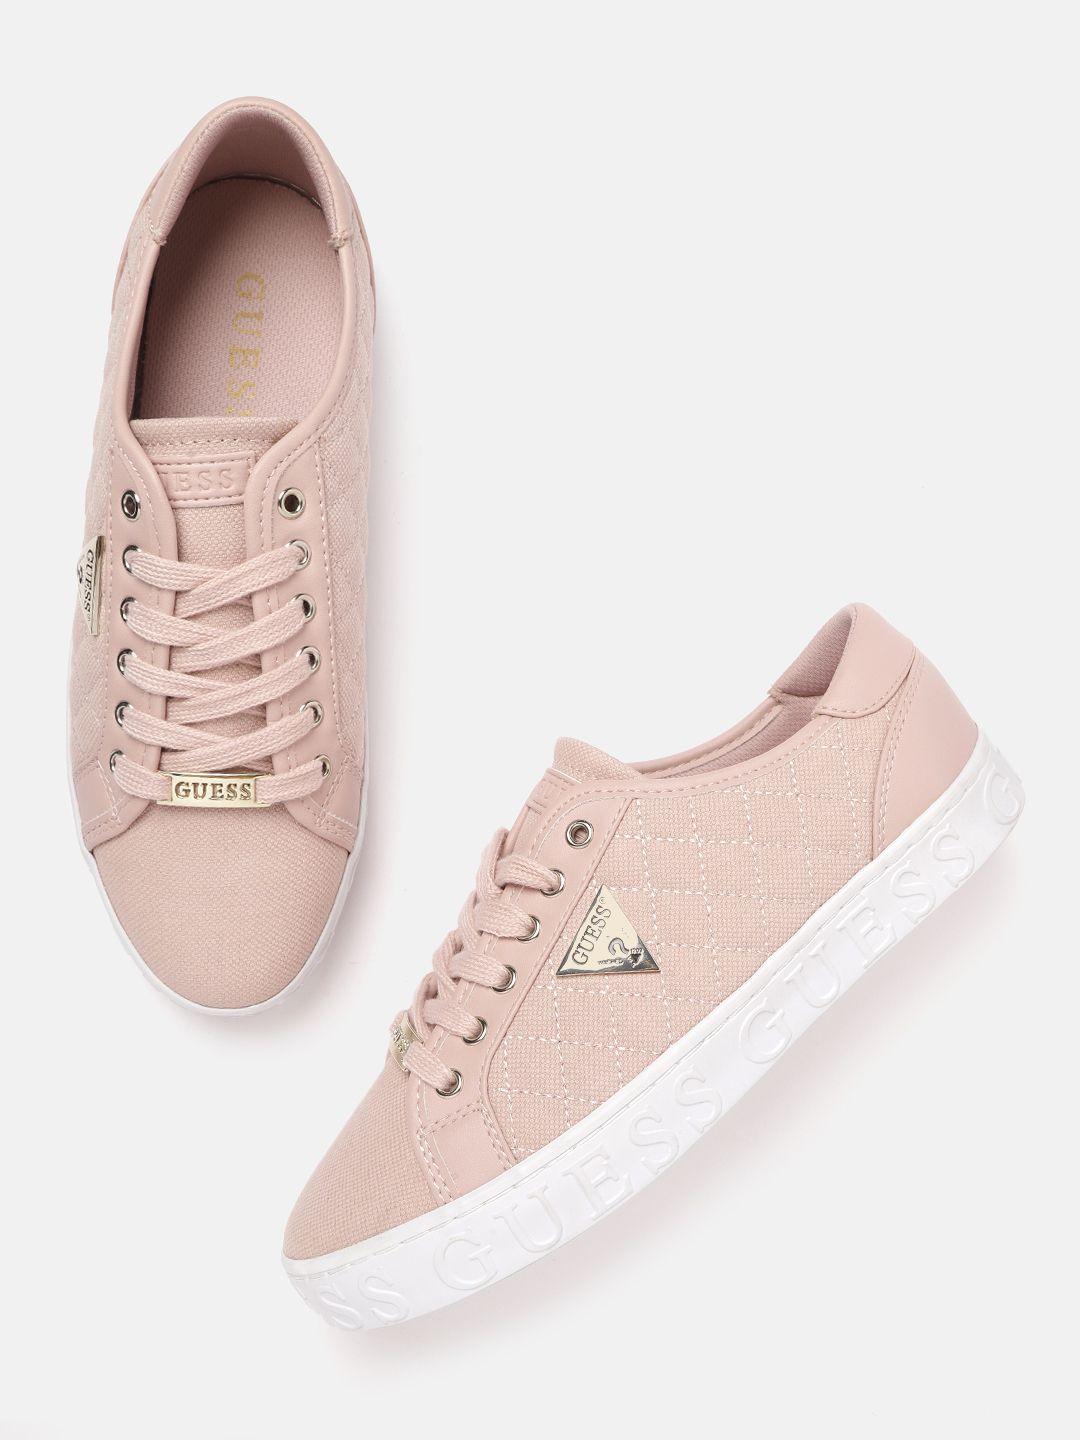 guess women peach-coloured quilted woven design sneakers